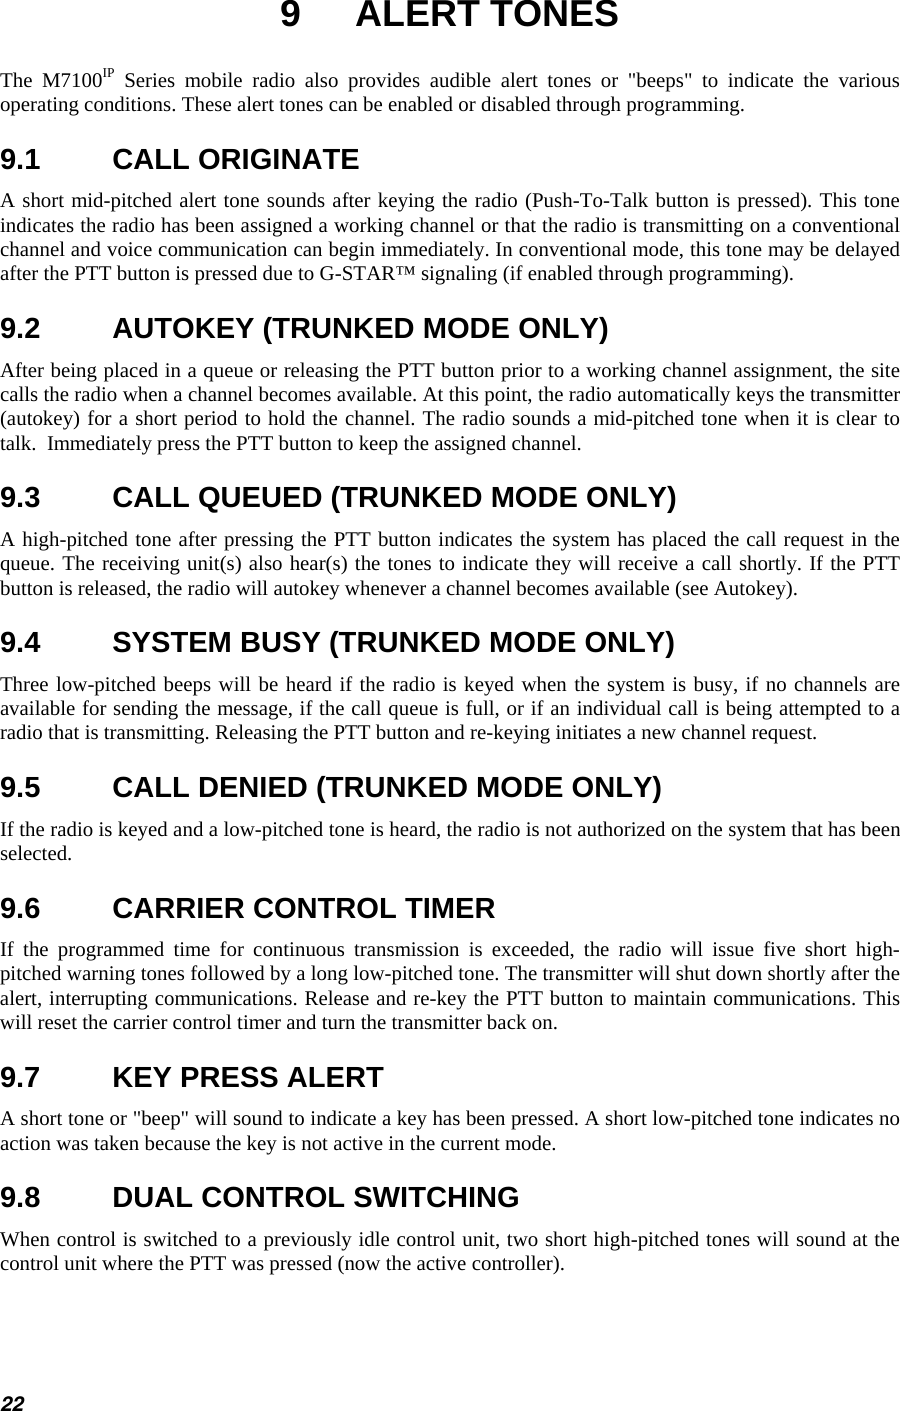  9 ALERT TONES The M7100IP Series mobile radio also provides audible alert tones or &quot;beeps&quot; to indicate the various operating conditions. These alert tones can be enabled or disabled through programming. 9.1 CALL ORIGINATE A short mid-pitched alert tone sounds after keying the radio (Push-To-Talk button is pressed). This tone indicates the radio has been assigned a working channel or that the radio is transmitting on a conventional channel and voice communication can begin immediately. In conventional mode, this tone may be delayed after the PTT button is pressed due to G-STAR™ signaling (if enabled through programming). 9.2  AUTOKEY (TRUNKED MODE ONLY) After being placed in a queue or releasing the PTT button prior to a working channel assignment, the site calls the radio when a channel becomes available. At this point, the radio automatically keys the transmitter (autokey) for a short period to hold the channel. The radio sounds a mid-pitched tone when it is clear to talk.  Immediately press the PTT button to keep the assigned channel. 9.3  CALL QUEUED (TRUNKED MODE ONLY) A high-pitched tone after pressing the PTT button indicates the system has placed the call request in the queue. The receiving unit(s) also hear(s) the tones to indicate they will receive a call shortly. If the PTT button is released, the radio will autokey whenever a channel becomes available (see Autokey). 9.4  SYSTEM BUSY (TRUNKED MODE ONLY) Three low-pitched beeps will be heard if the radio is keyed when the system is busy, if no channels are available for sending the message, if the call queue is full, or if an individual call is being attempted to a radio that is transmitting. Releasing the PTT button and re-keying initiates a new channel request. 9.5  CALL DENIED (TRUNKED MODE ONLY) If the radio is keyed and a low-pitched tone is heard, the radio is not authorized on the system that has been selected. 9.6  CARRIER CONTROL TIMER If the programmed time for continuous transmission is exceeded, the radio will issue five short high-pitched warning tones followed by a long low-pitched tone. The transmitter will shut down shortly after the alert, interrupting communications. Release and re-key the PTT button to maintain communications. This will reset the carrier control timer and turn the transmitter back on. 9.7  KEY PRESS ALERT A short tone or &quot;beep&quot; will sound to indicate a key has been pressed. A short low-pitched tone indicates no action was taken because the key is not active in the current mode. 9.8  DUAL CONTROL SWITCHING When control is switched to a previously idle control unit, two short high-pitched tones will sound at the control unit where the PTT was pressed (now the active controller). 22 